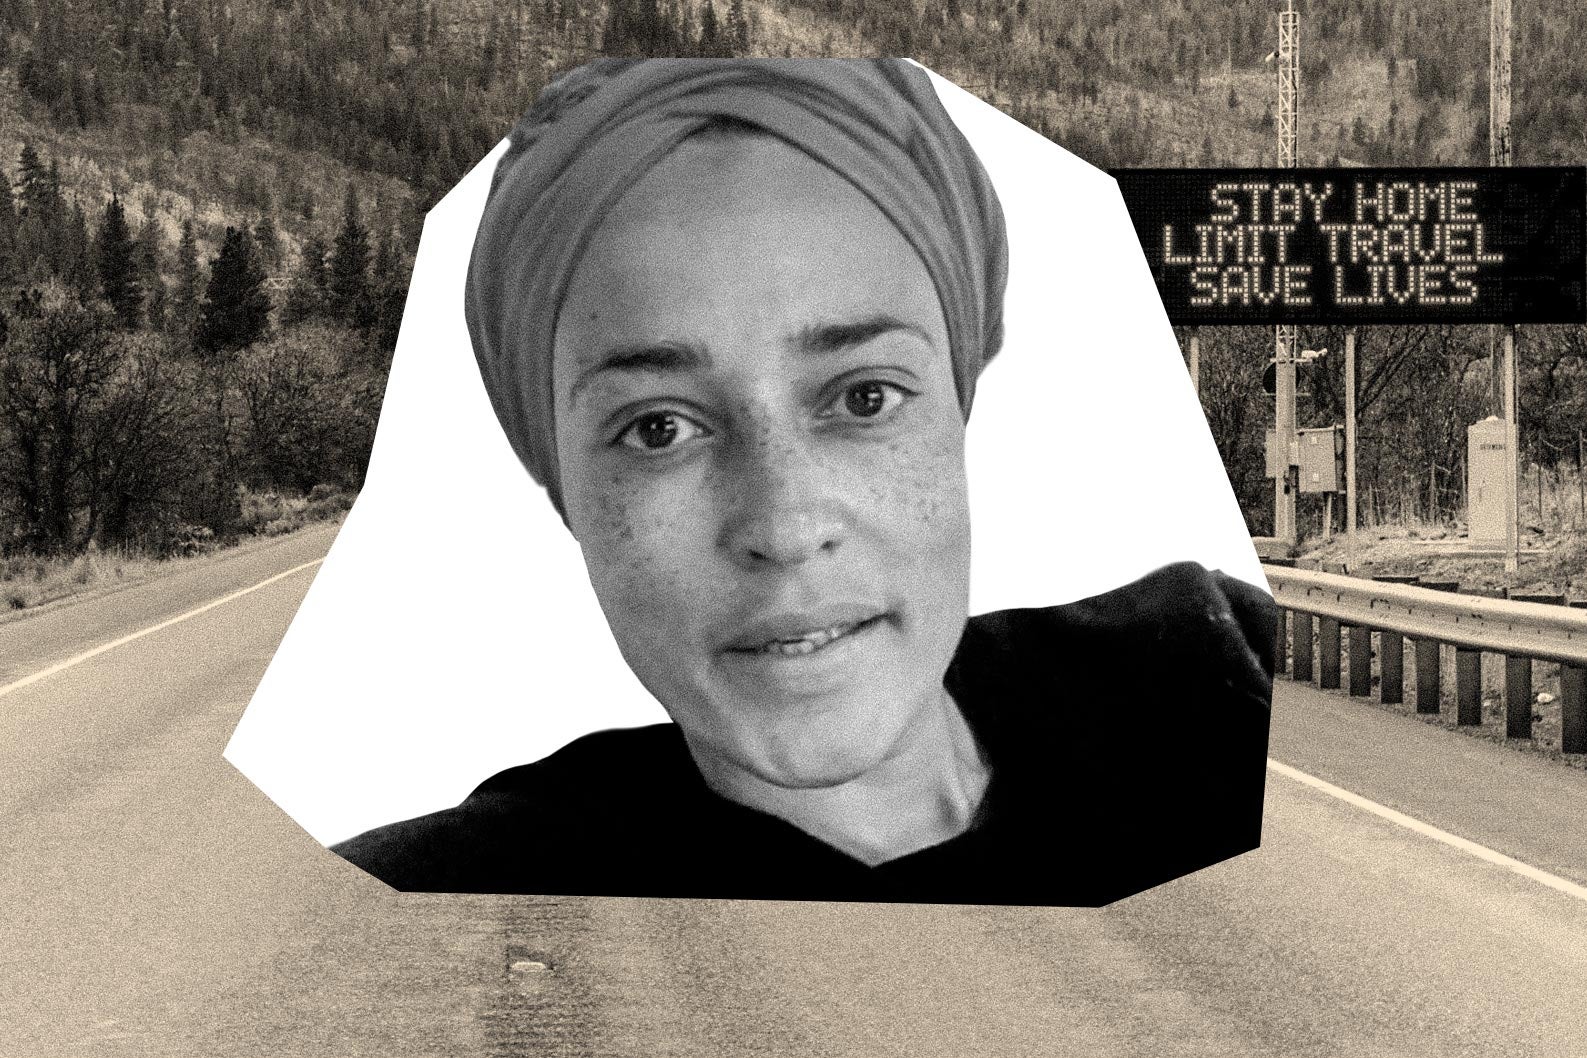 A cutout of Zadie Smiths' face is seen over a photo of a road featuring a sign that says "Stay Home. Limit Travel. Save Lives."